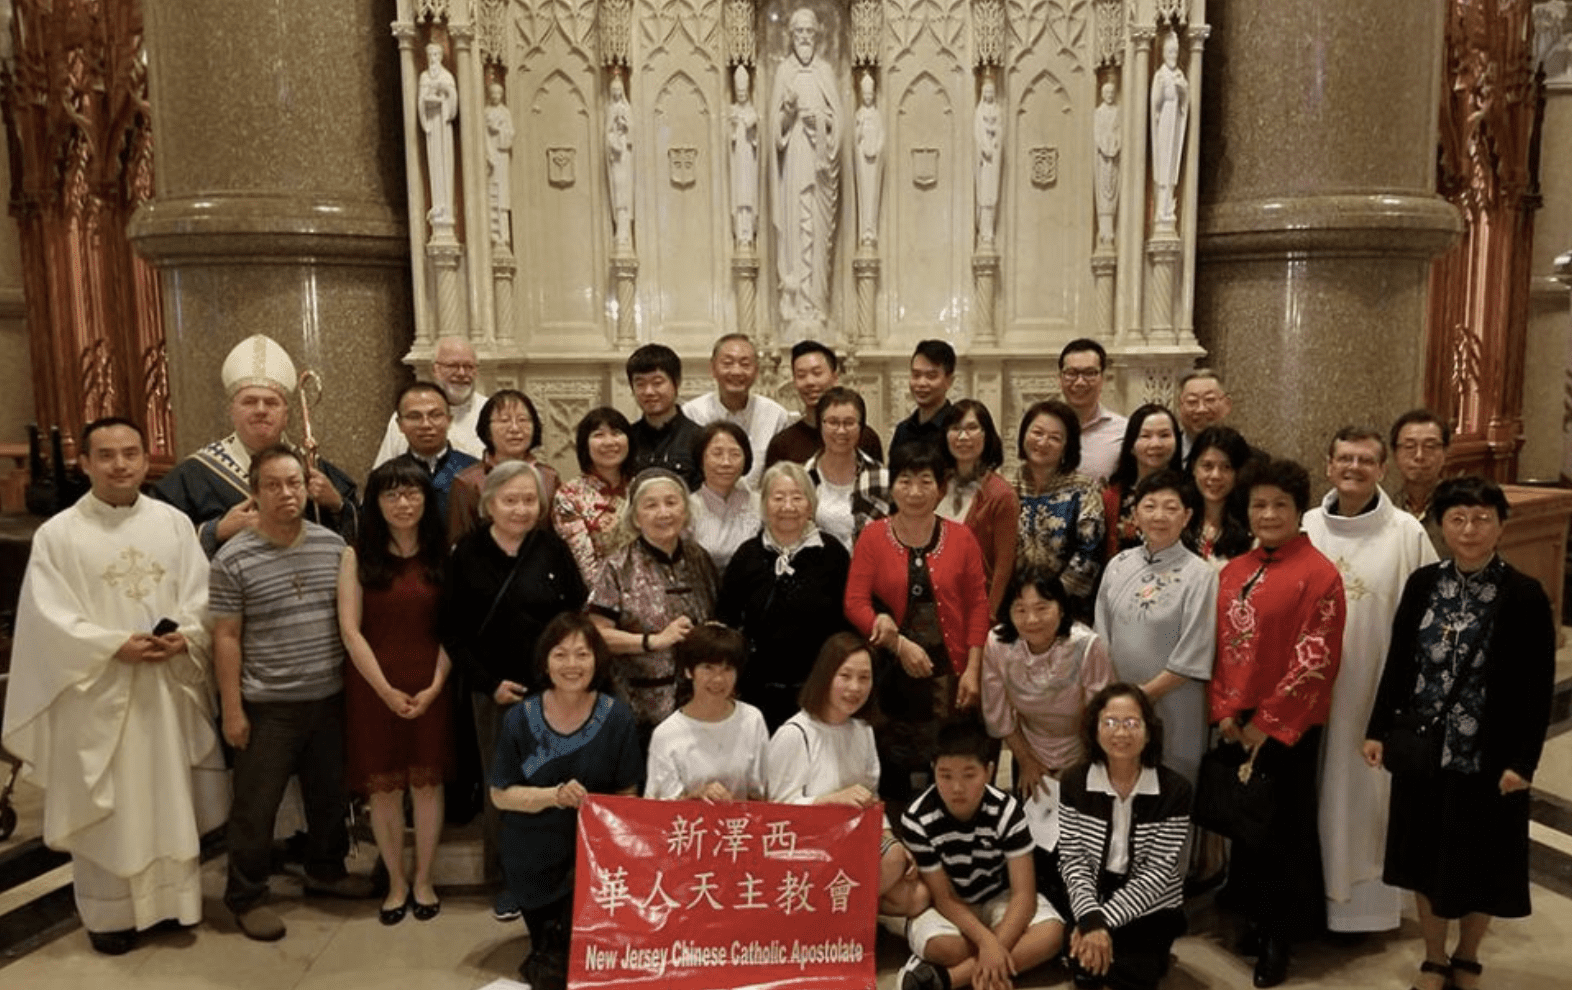 Felician Sr. Dong Hong Marie Zhang, at far right, with the New Jersey Chinese Catholic Apostolate. Newark Cardinal Joseph Tobin is second from left. (Courtesy of Dong Hong Marie Zhang)